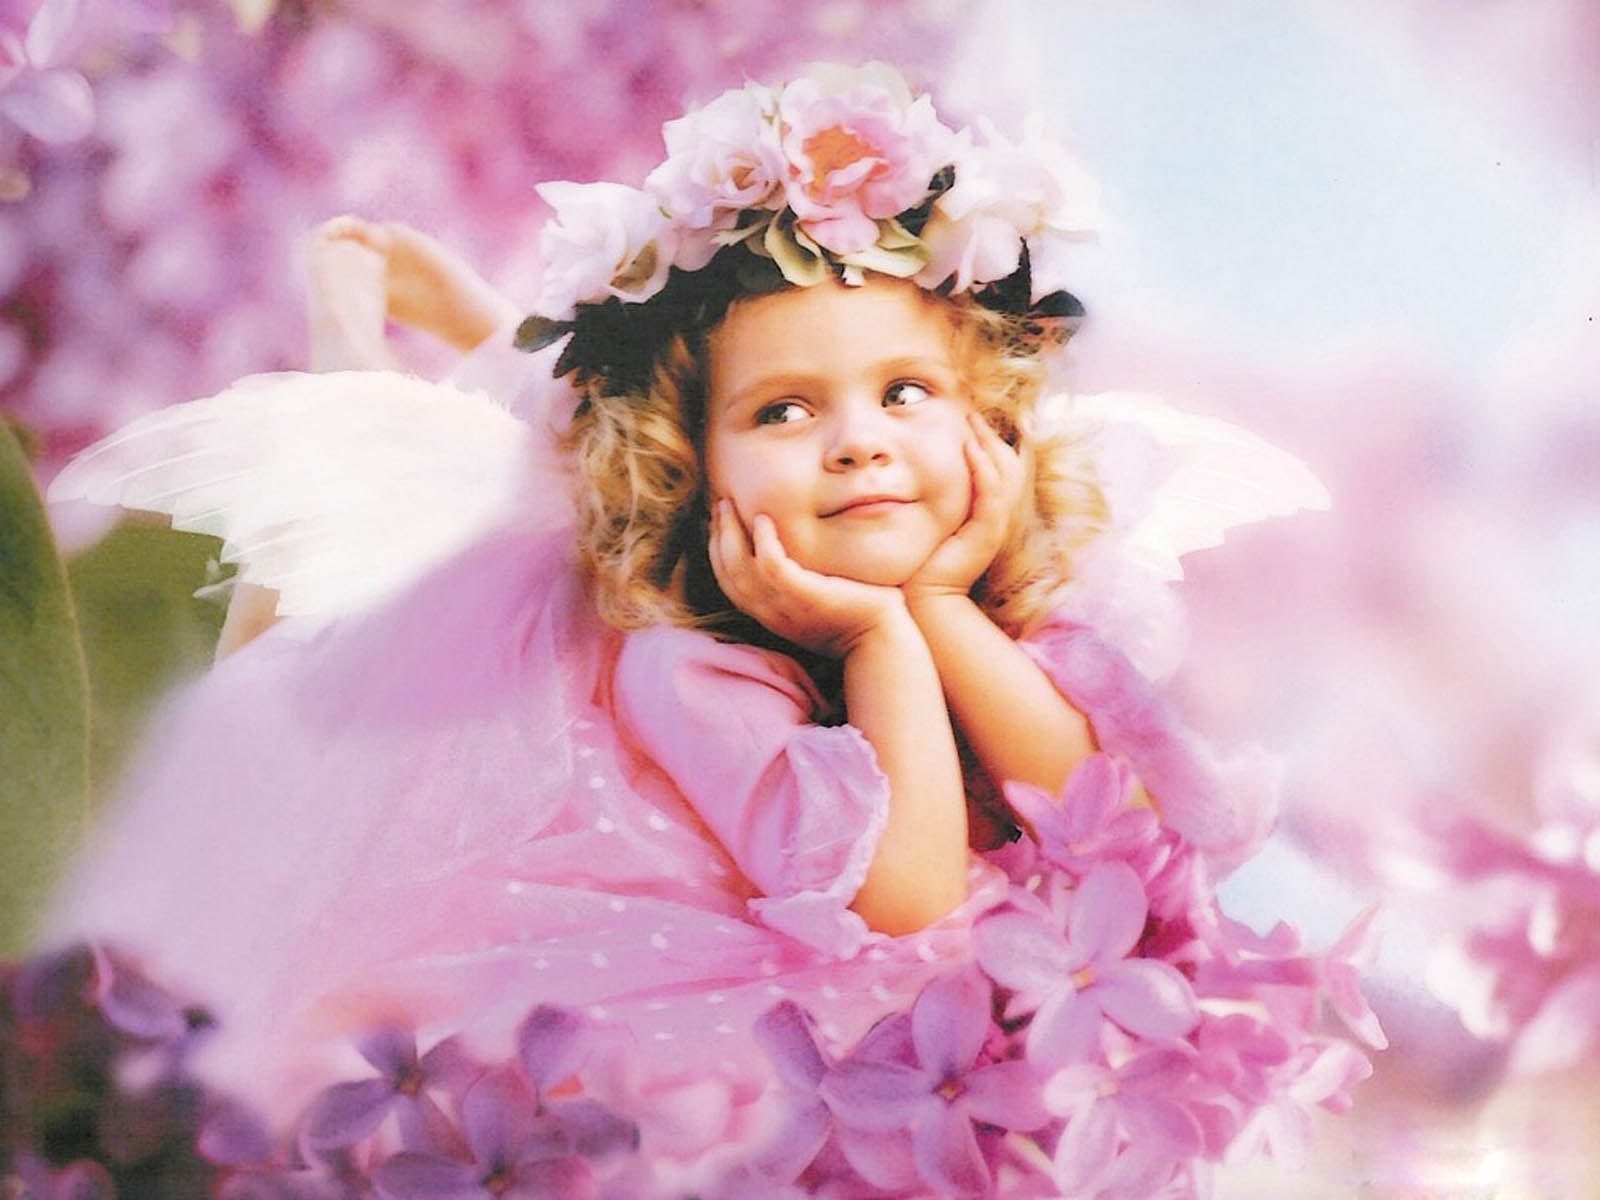 baby angel wallpaper,pink,lilac,child,beauty,angel